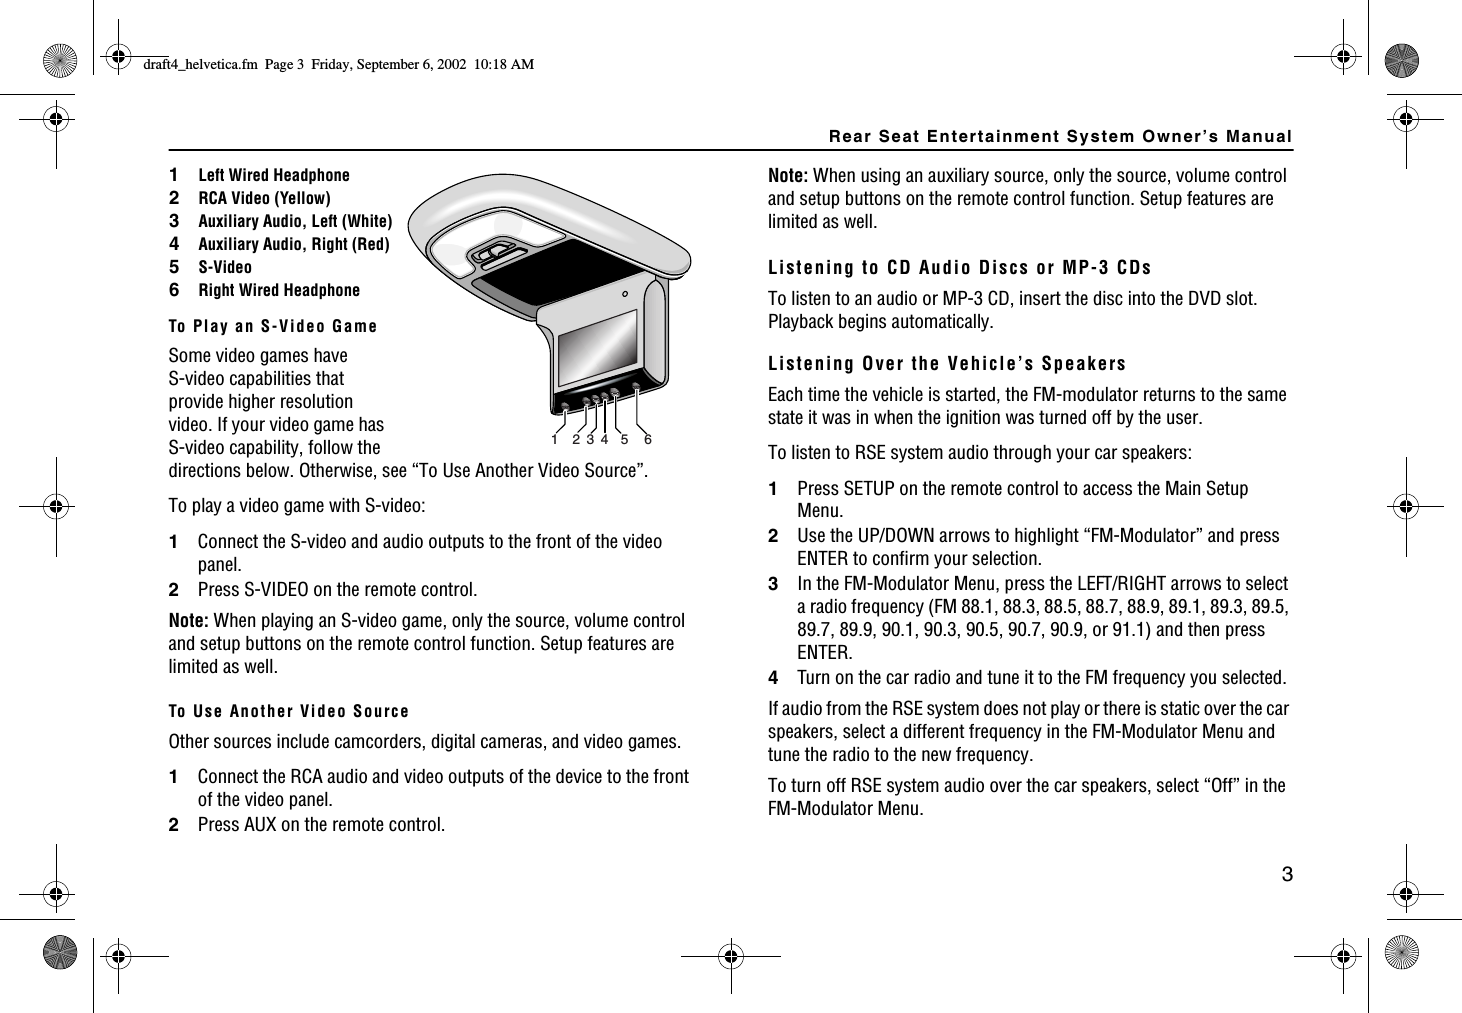 Rear Seat Entertainment System Owner’s Manual3To Play an S-Video GameSome video games have S-video capabilities that provide higher resolution video. If your video game has S-video capability, follow the directions below. Otherwise, see “To Use Another Video Source”.To play a video game with S-video:1Connect the S-video and audio outputs to the front of the video panel.2Press S-VIDEO on the remote control.Note: When playing an S-video game, only the source, volume control and setup buttons on the remote control function. Setup features are limited as well.To Use Another Video SourceOther sources include camcorders, digital cameras, and video games. 1Connect the RCA audio and video outputs of the device to the front of the video panel.2Press AUX on the remote control.12345 6Note: When using an auxiliary source, only the source, volume control and setup buttons on the remote control function. Setup features are limited as well.Listening to CD Audio Discs or MP-3 CDsTo listen to an audio or MP-3 CD, insert the disc into the DVD slot. Playback begins automatically. Listening Over the Vehicle’s SpeakersEach time the vehicle is started, the FM-modulator returns to the same state it was in when the ignition was turned off by the user. To listen to RSE system audio through your car speakers:1Press SETUP on the remote control to access the Main Setup Menu.2Use the UP/DOWN arrows to highlight “FM-Modulator” and press ENTER to confirm your selection.3In the FM-Modulator Menu, press the LEFT/RIGHT arrows to select a radio frequency (FM 88.1, 88.3, 88.5, 88.7, 88.9, 89.1, 89.3, 89.5, 89.7, 89.9, 90.1, 90.3, 90.5, 90.7, 90.9, or 91.1) and then press ENTER.4Turn on the car radio and tune it to the FM frequency you selected. If audio from the RSE system does not play or there is static over the car speakers, select a different frequency in the FM-Modulator Menu and tune the radio to the new frequency.To turn off RSE system audio over the car speakers, select “Off” in the FM-Modulator Menu.1Left Wired Headphone2RCA Video (Yellow)3Auxiliary Audio, Left (White)4Auxiliary Audio, Right (Red)5S-Video6Right Wired HeadphoneFTCHVAJGNXGVKECHO2CIG(TKFC[5GRVGODGT#/